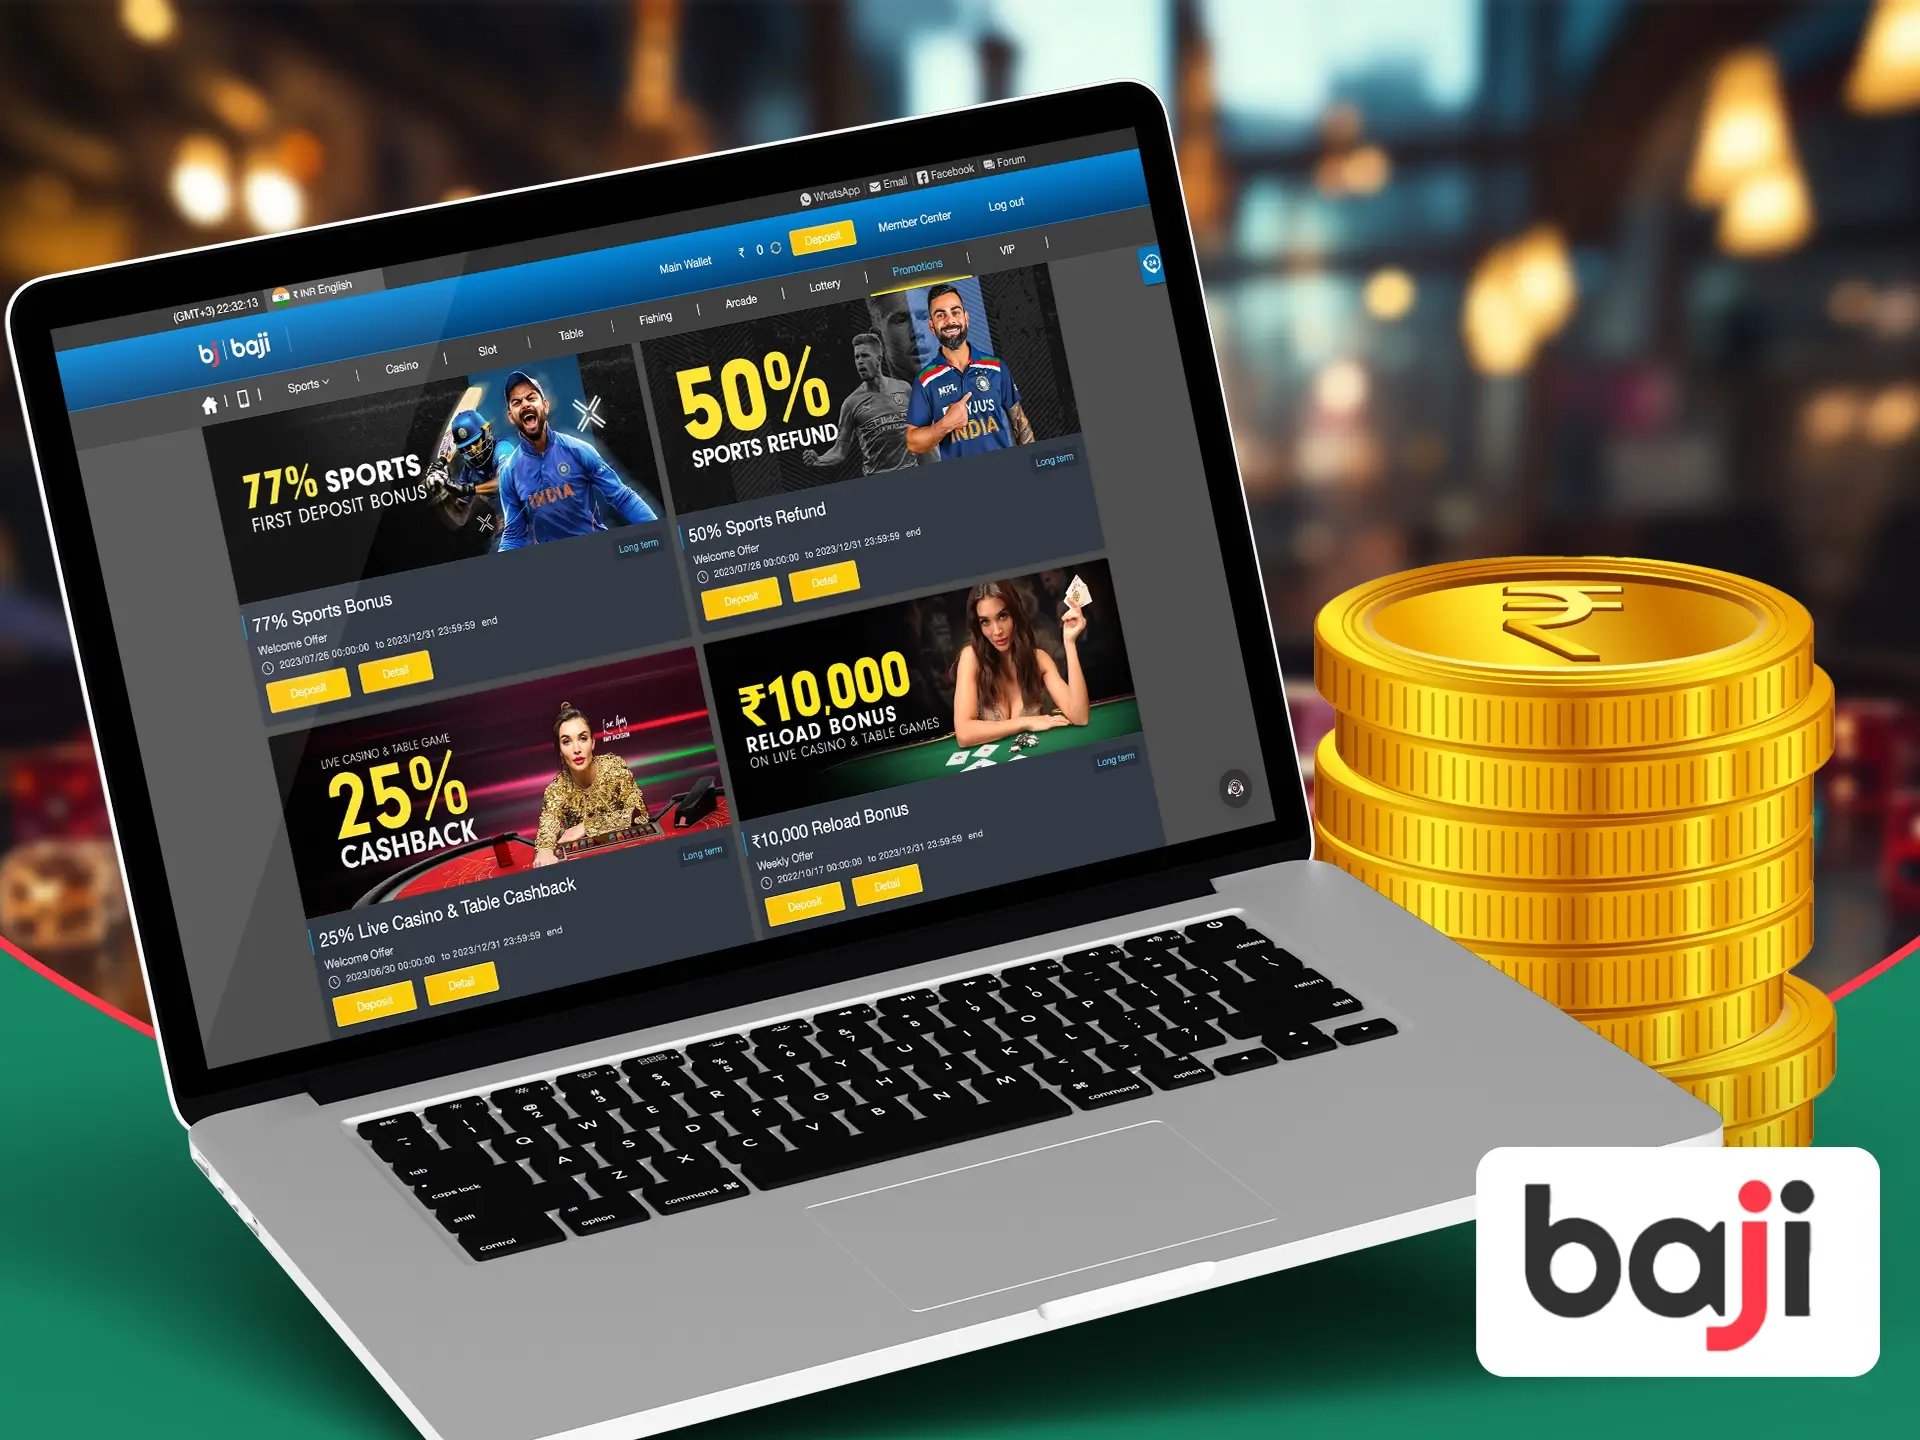 Any player who hits the "promotions" section will be very surprised by the variety of bonuses offered by Baji.